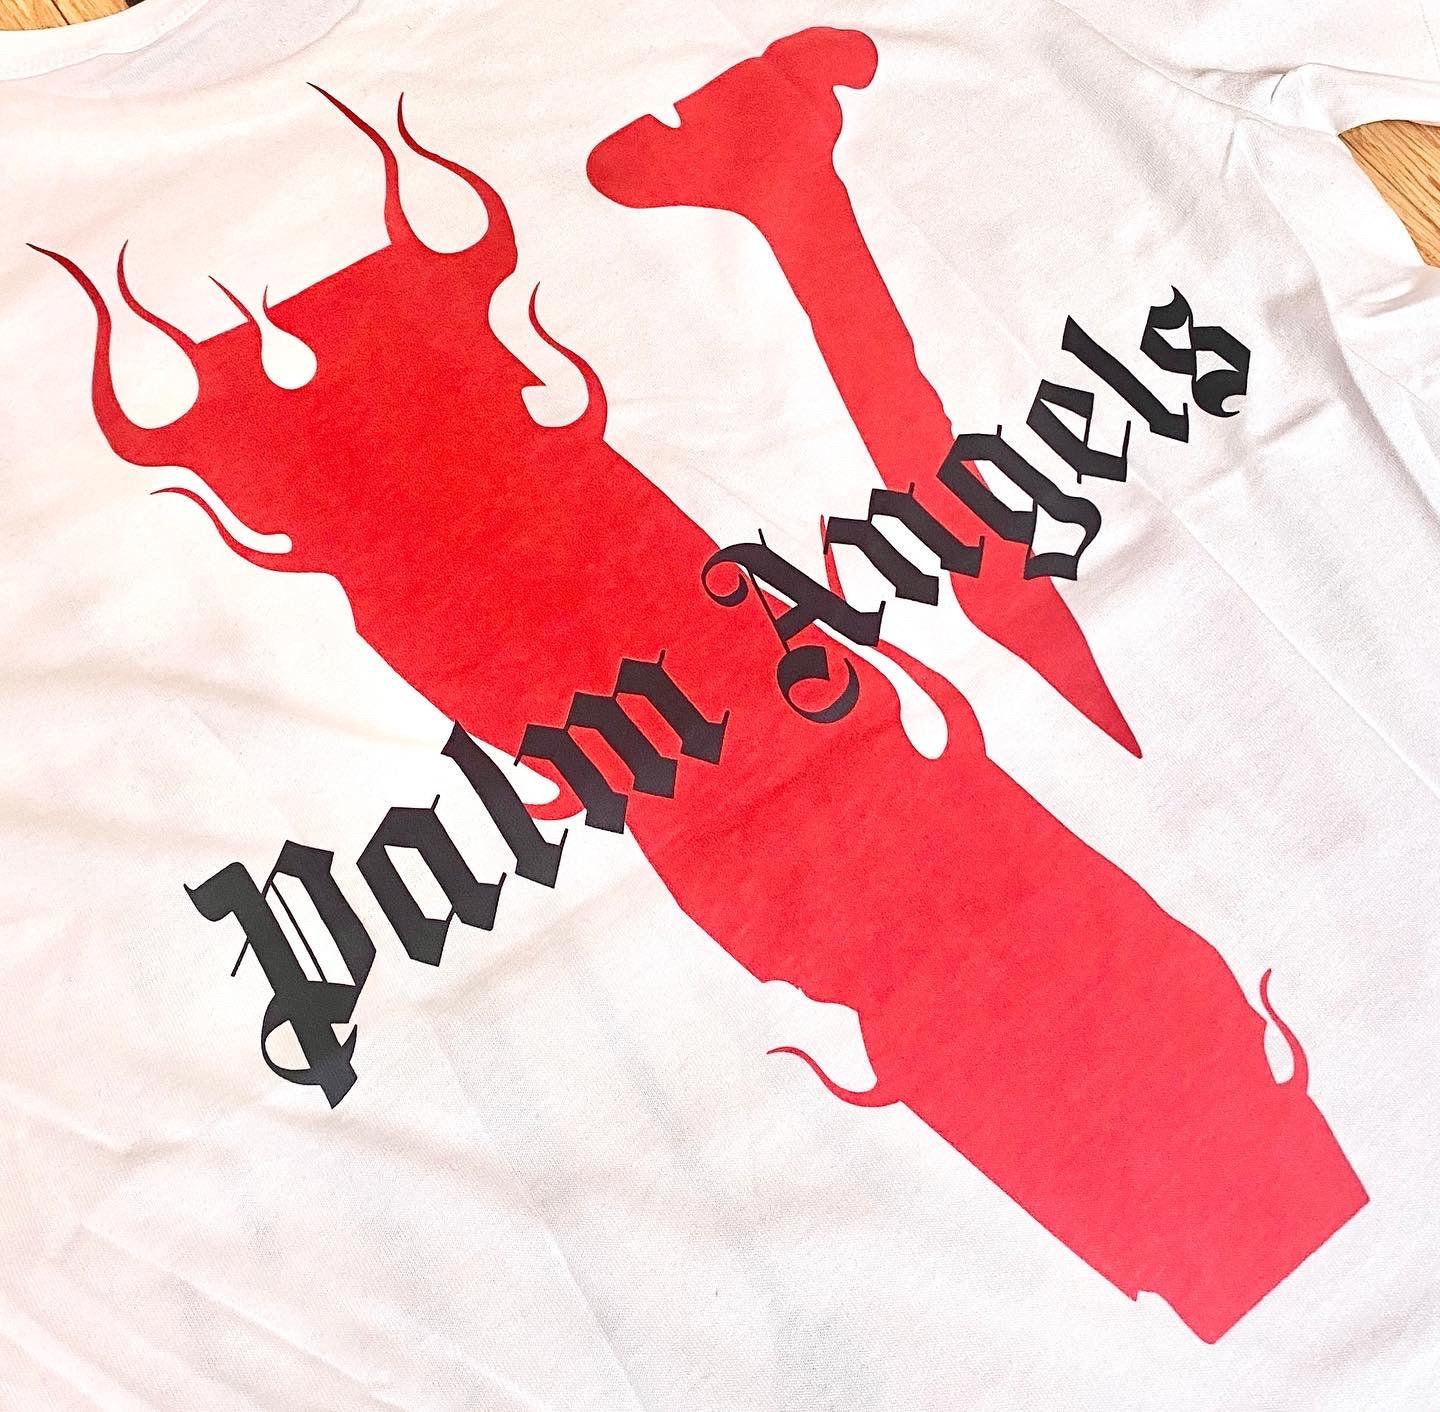 Vlone X Palm Angels Tee Size Medium White And Red Nepal